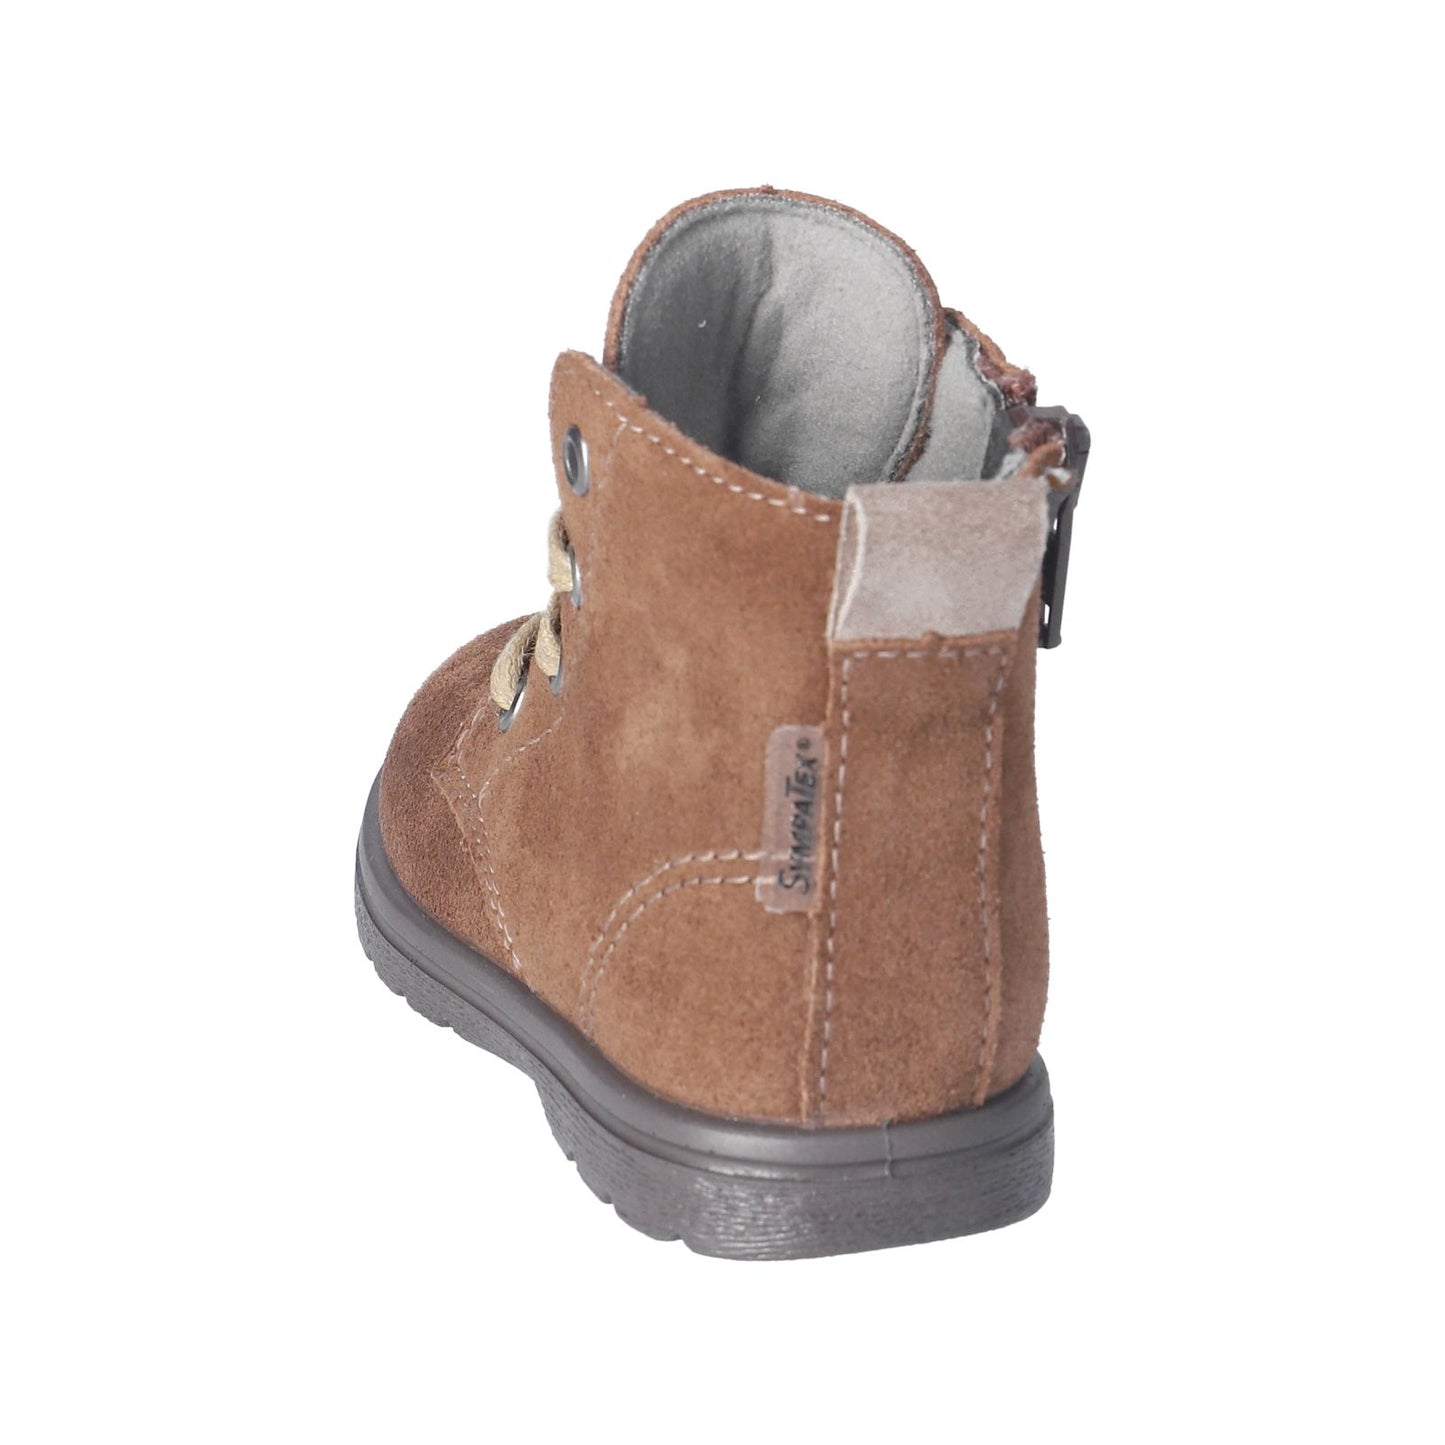 A unisex waterproof ankle boot by Ricosta, style Ilvy, in brown suede with lace and zip fastening. Angled view.